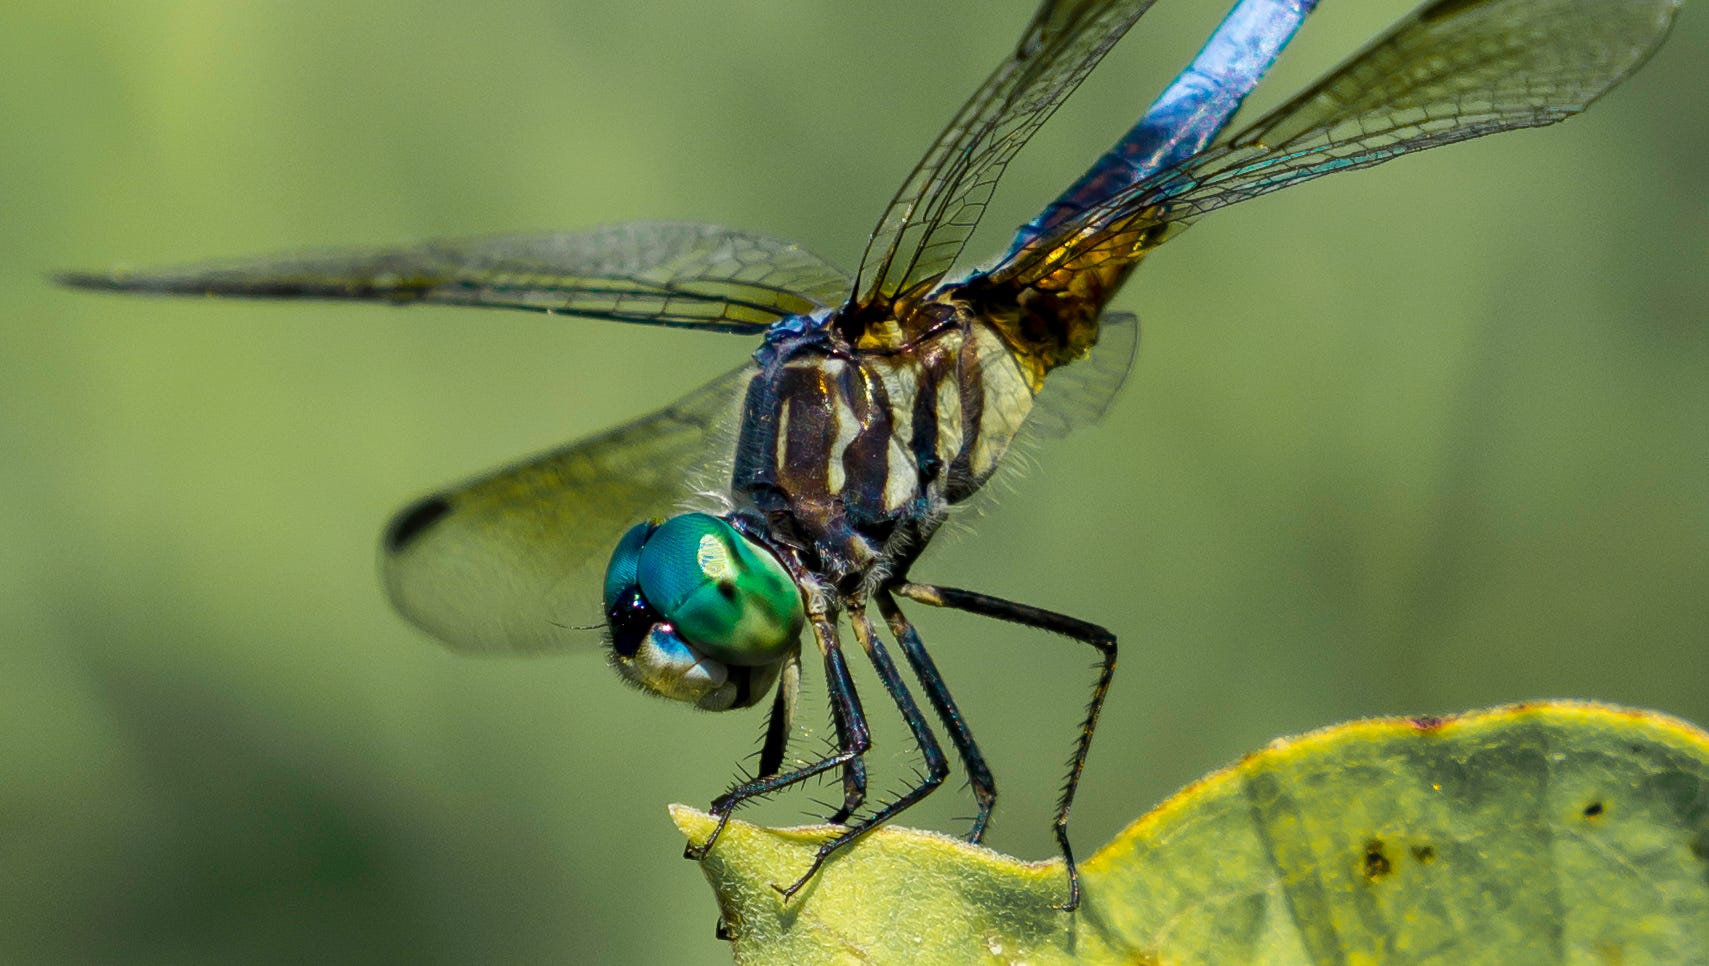 Randy Maslovich of Northville was at Kensington Park, waiting for an osprey to return to its nest. "I had my macro lens and decided to look around in the brush and found this dragonfly," he said. "I approached very slowly to not scare it away and was able to get close enough for some clear shots."